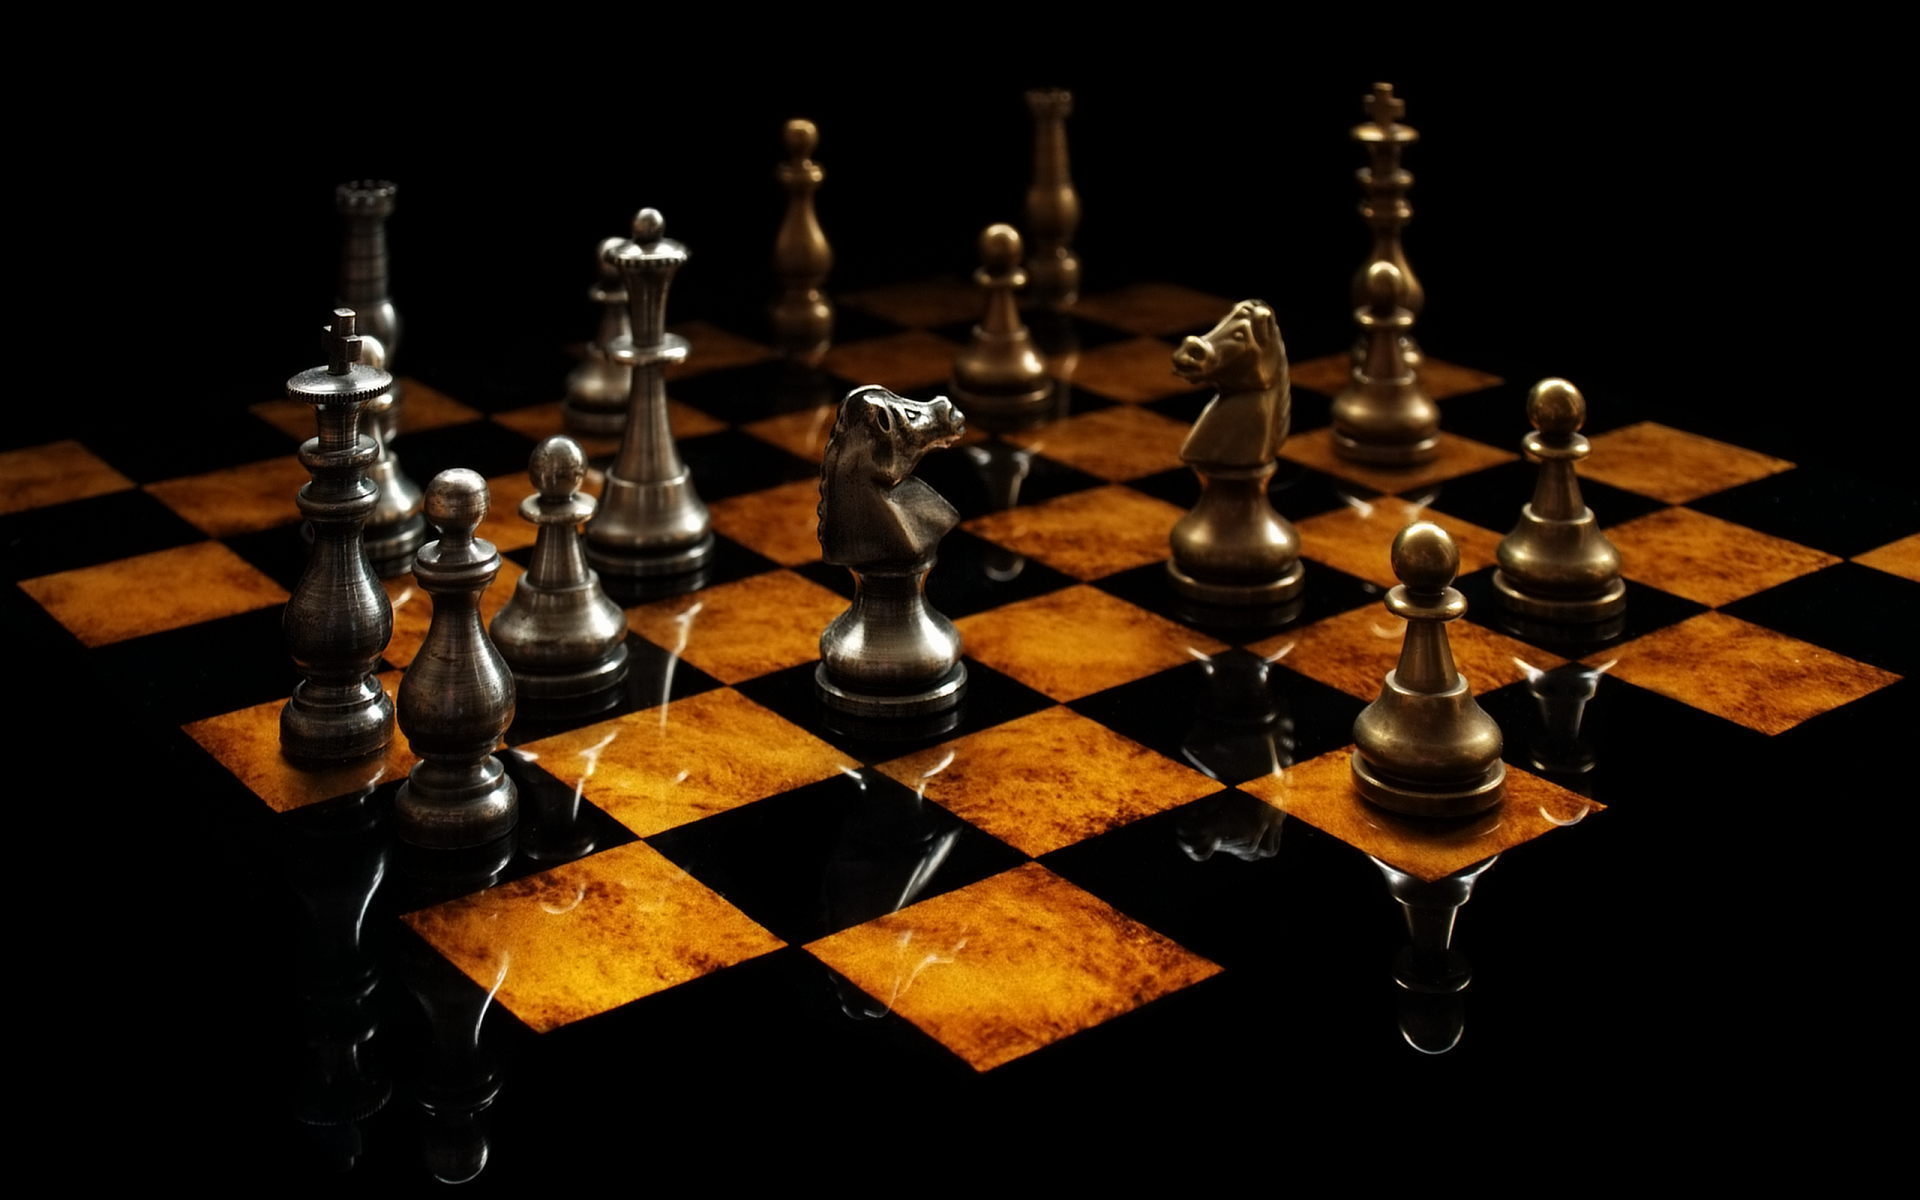 HD Wallpaper 3d Chess For Desktop Game Picture